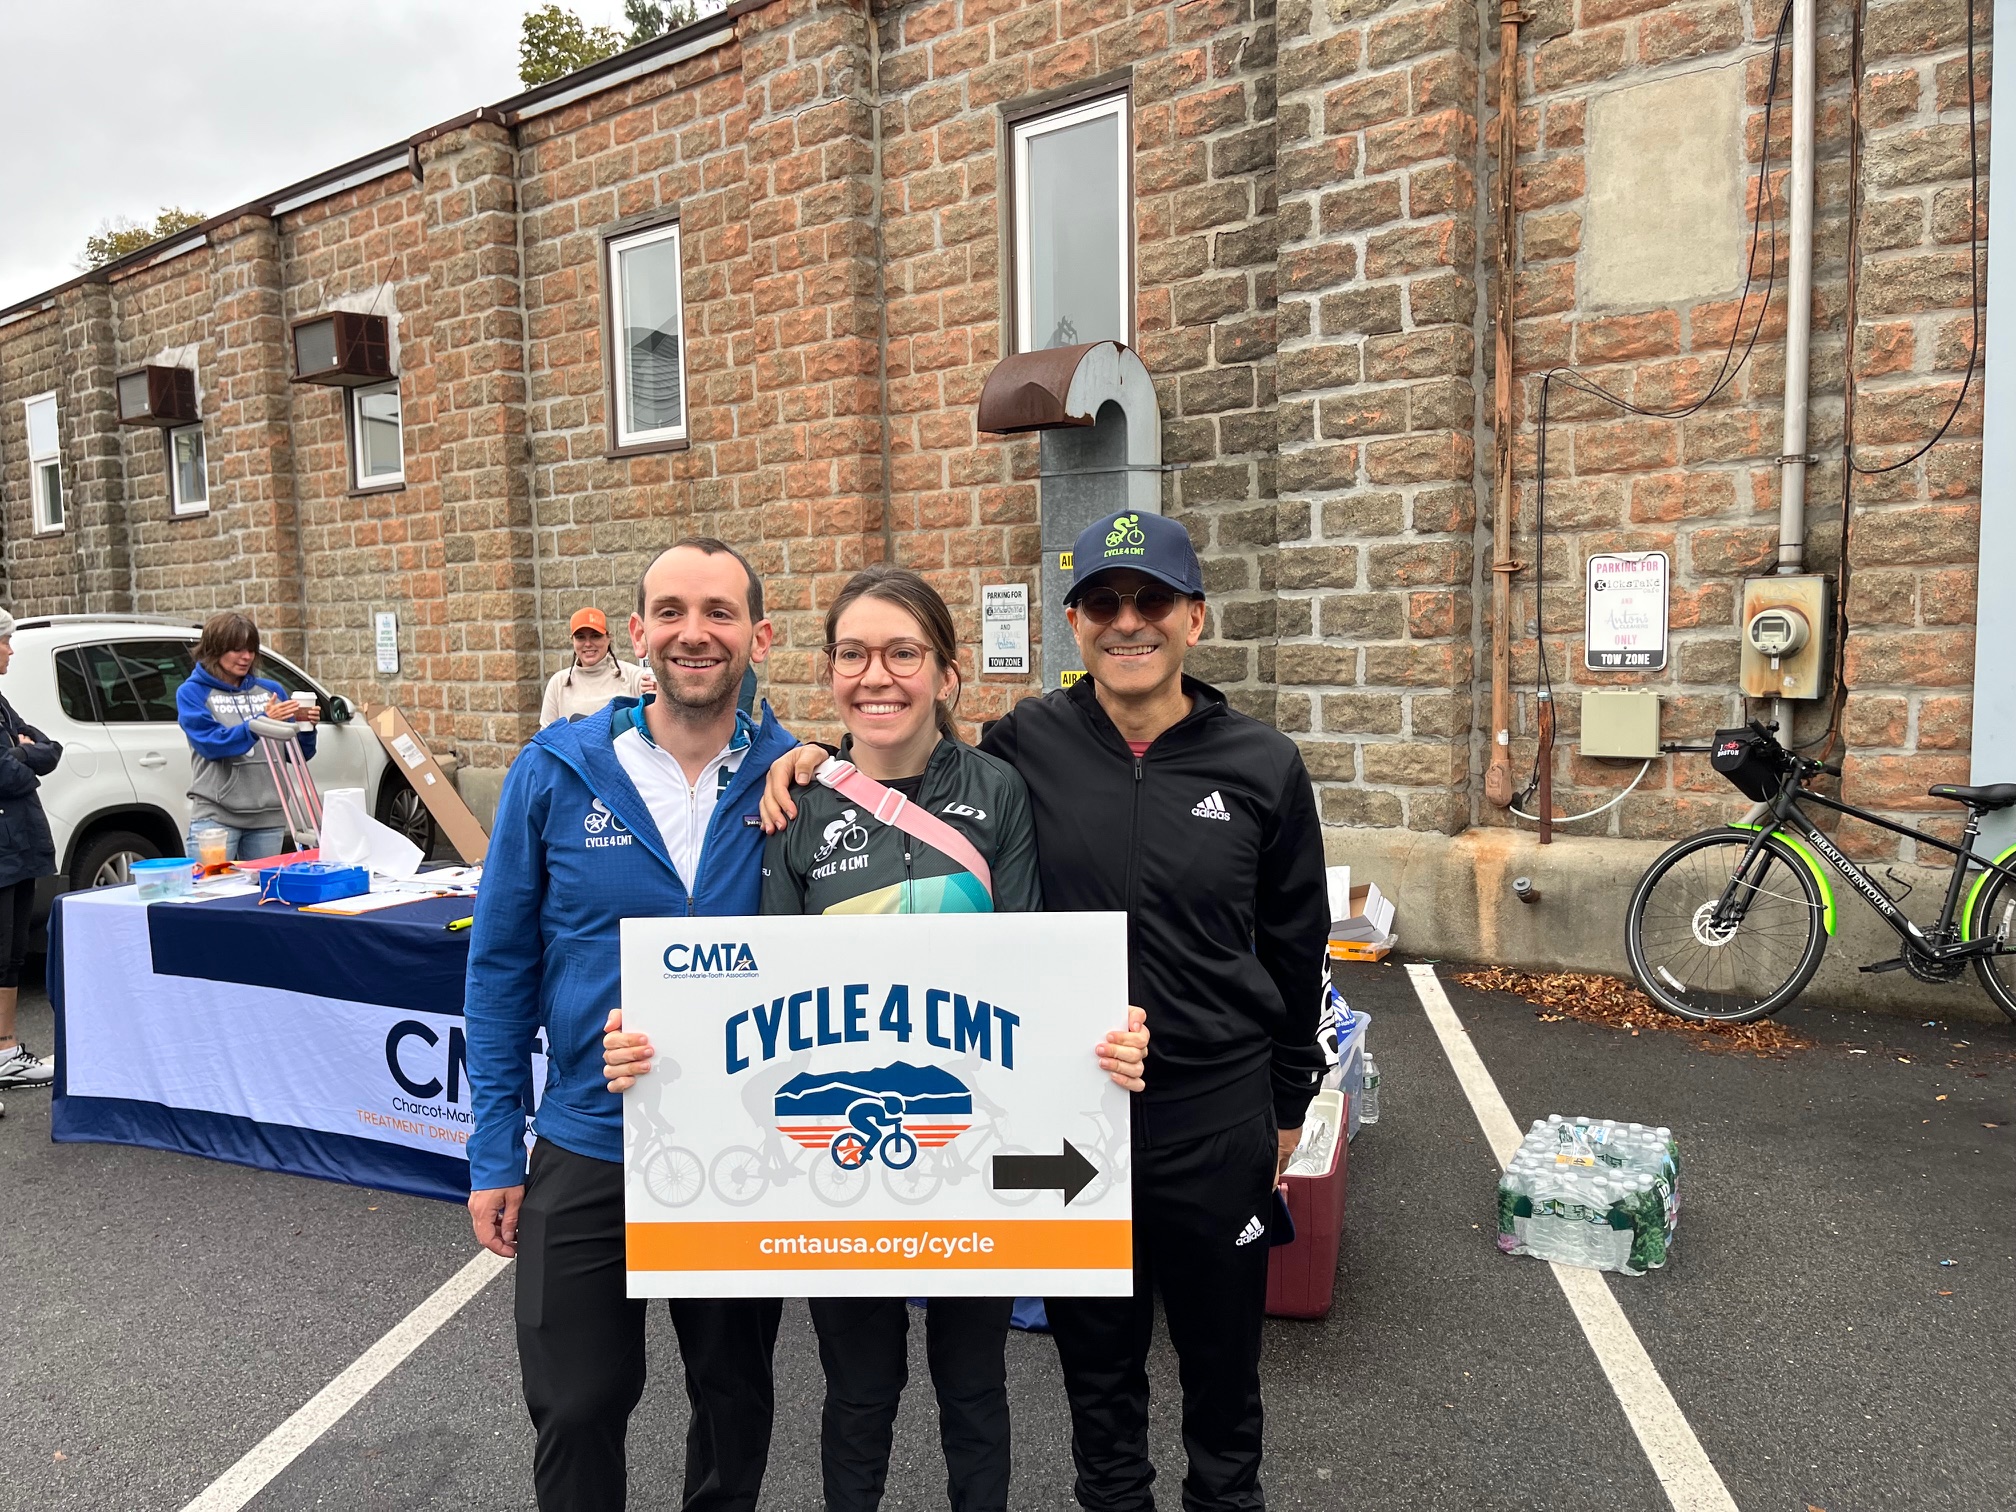 Aaron, Mary Cate, and Dr. Kleopas stand together holding a sign that reads "CMTA: Cycle 4 CMT". In this fundraiser, they successfully raised over twenty-three thousand dollars that will go directly towards funding a cure for CMT4C!